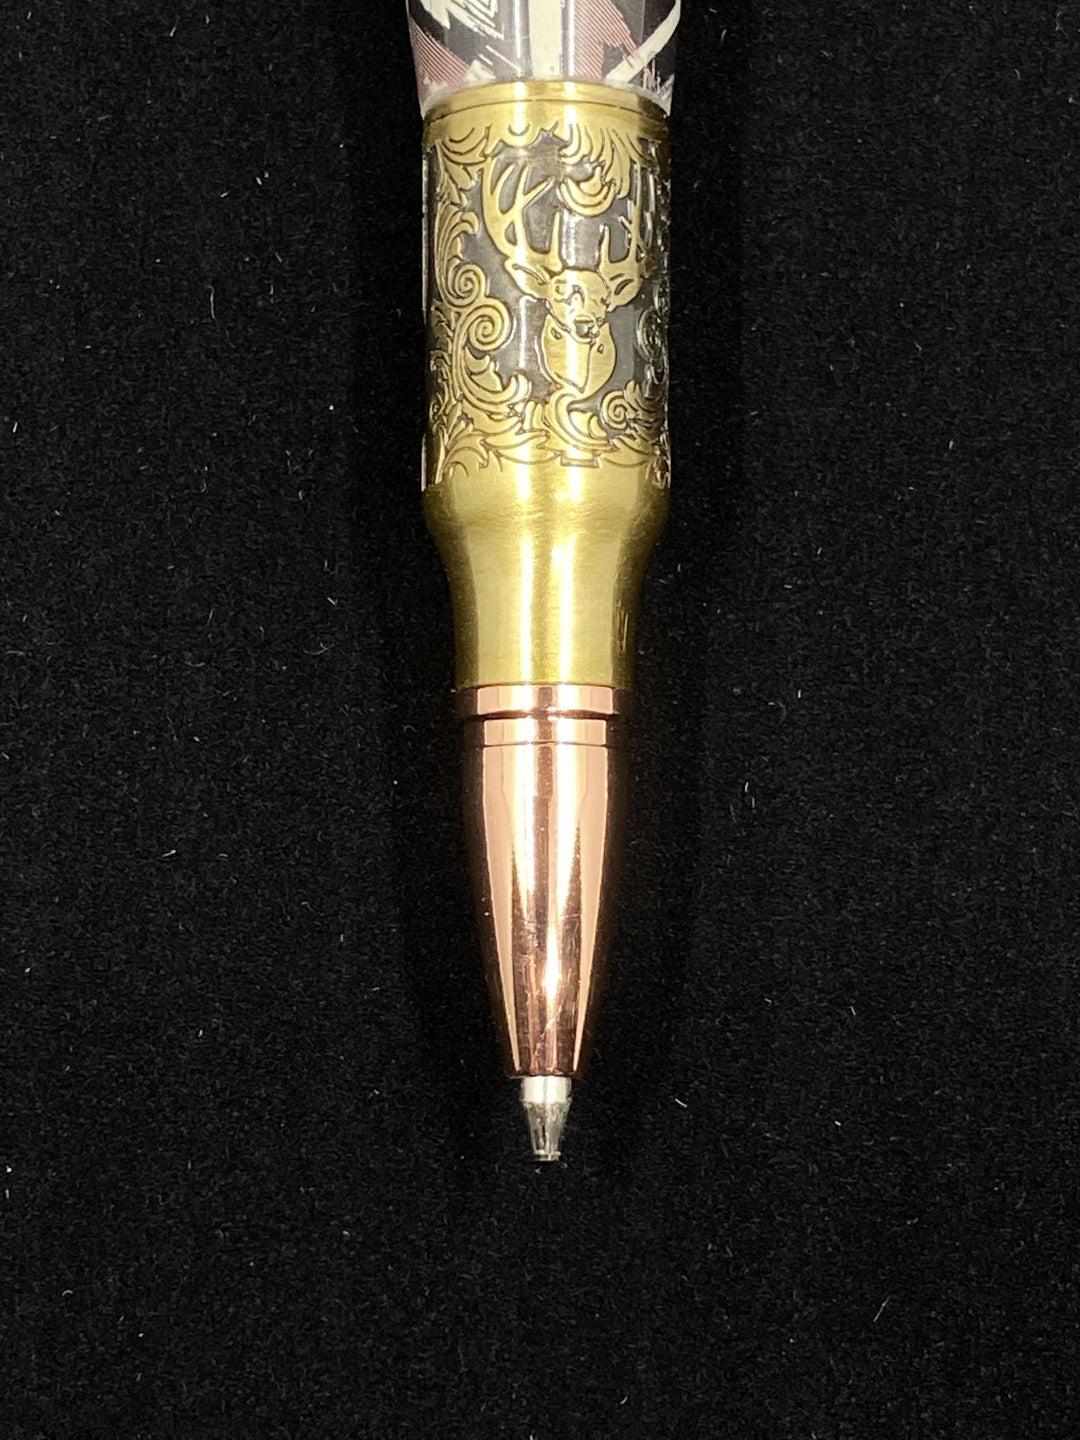 Custom Crafted Pen - WTFCAMO - WhiteTail Forensics